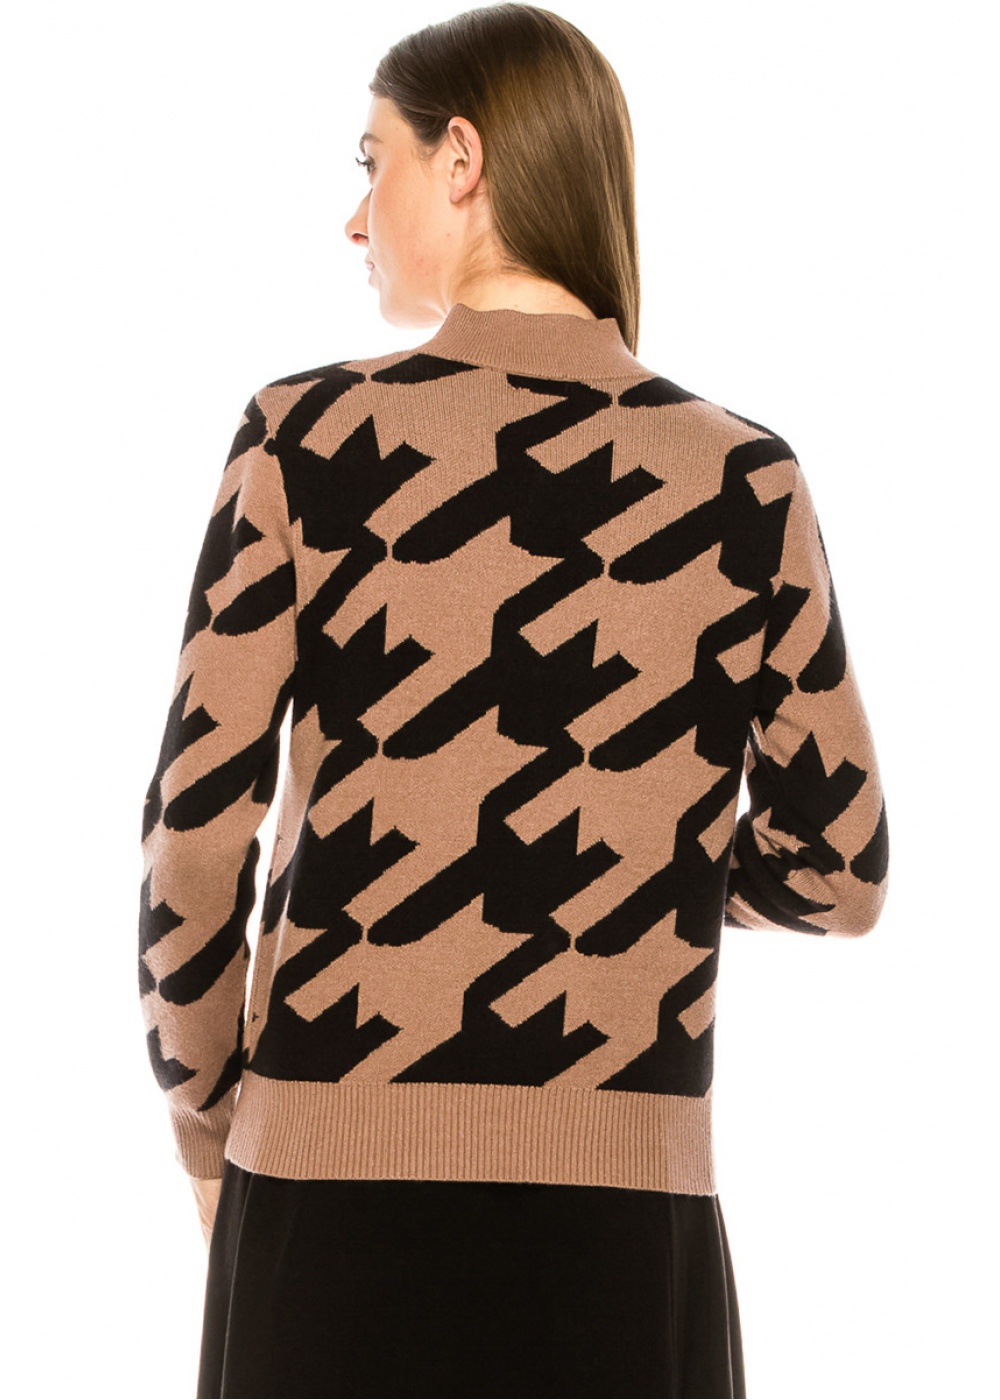 Large houndstooth pattern sweater in taupe